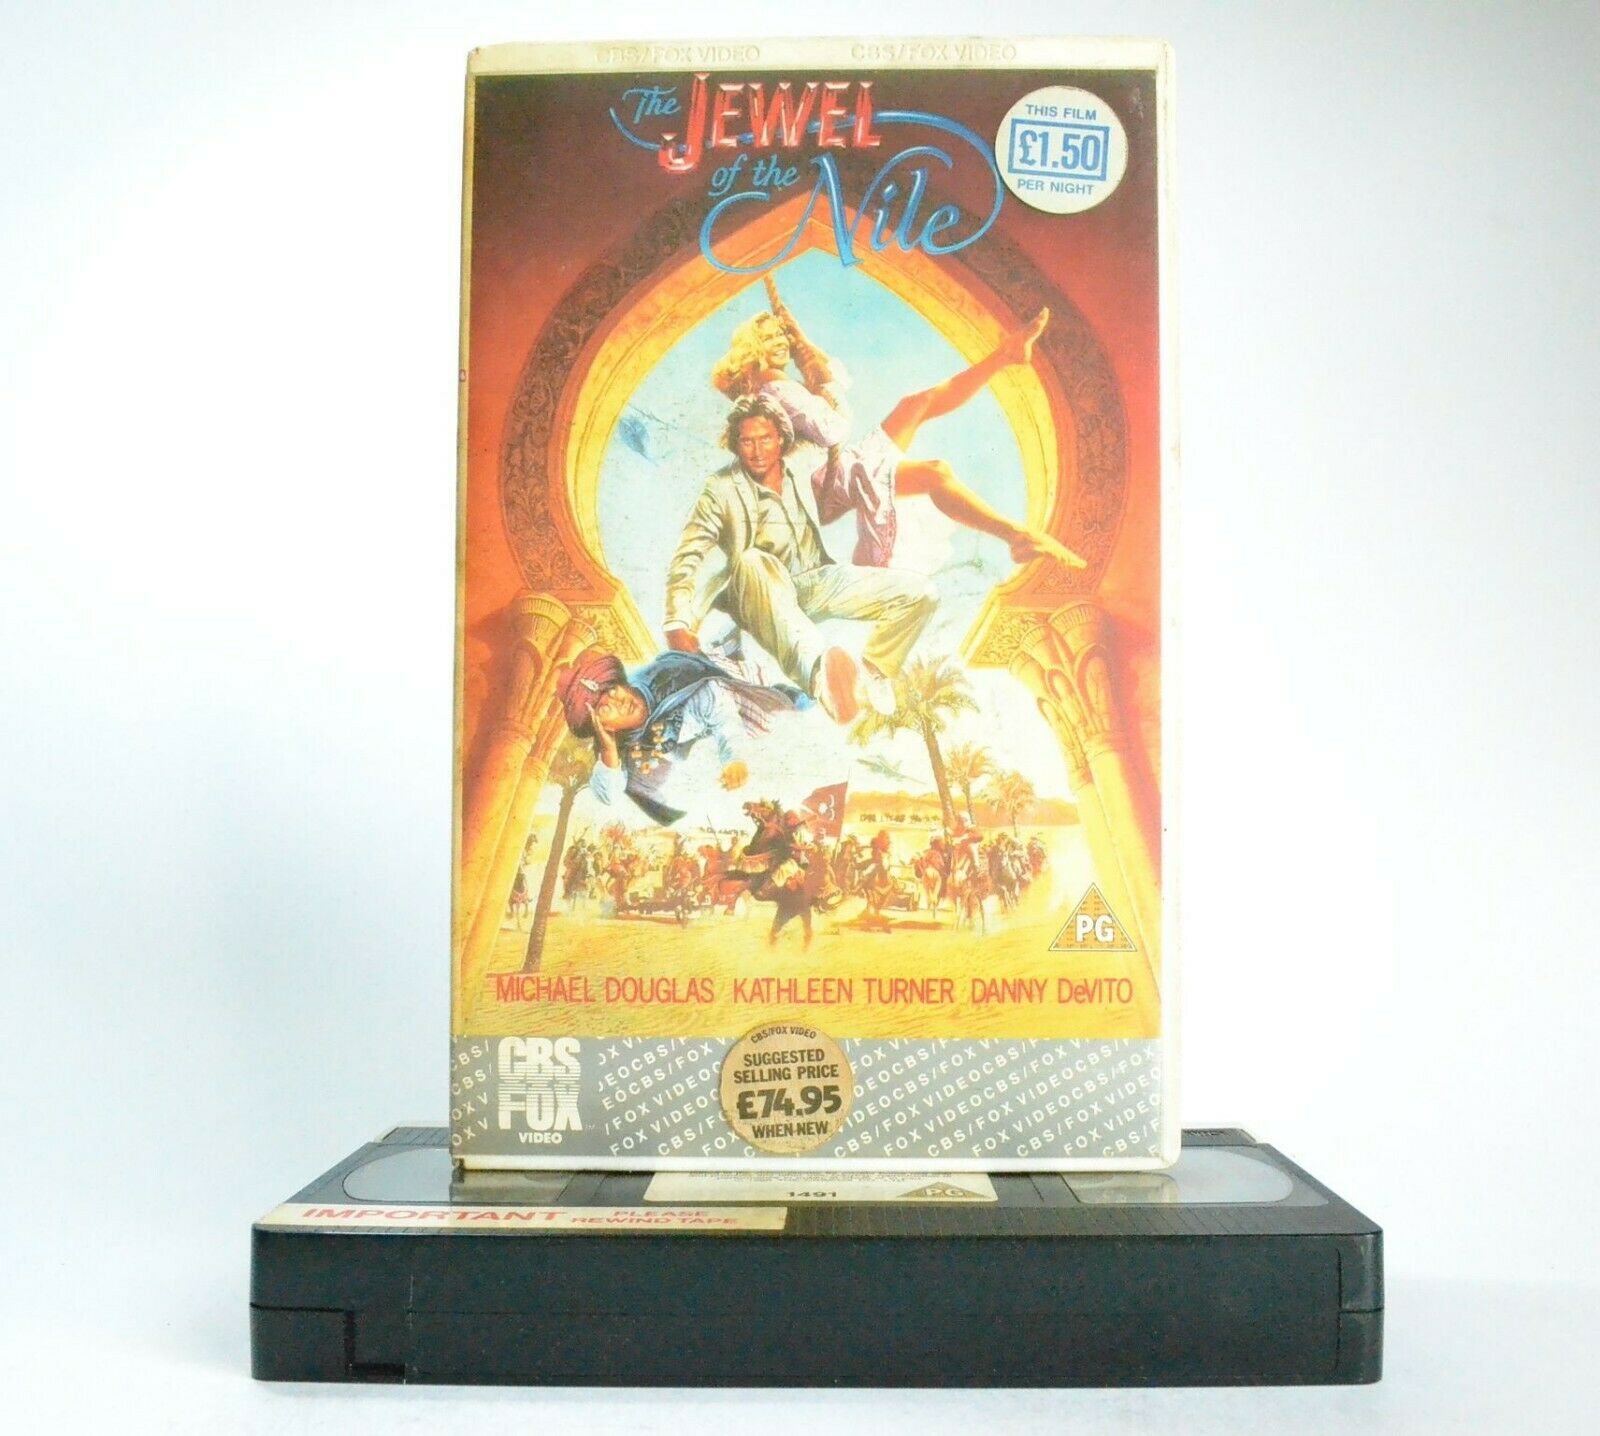 The Jewel Of The Nile: CBS/FOX (1985) - Action Comedy - Michael Douglas - VHS-